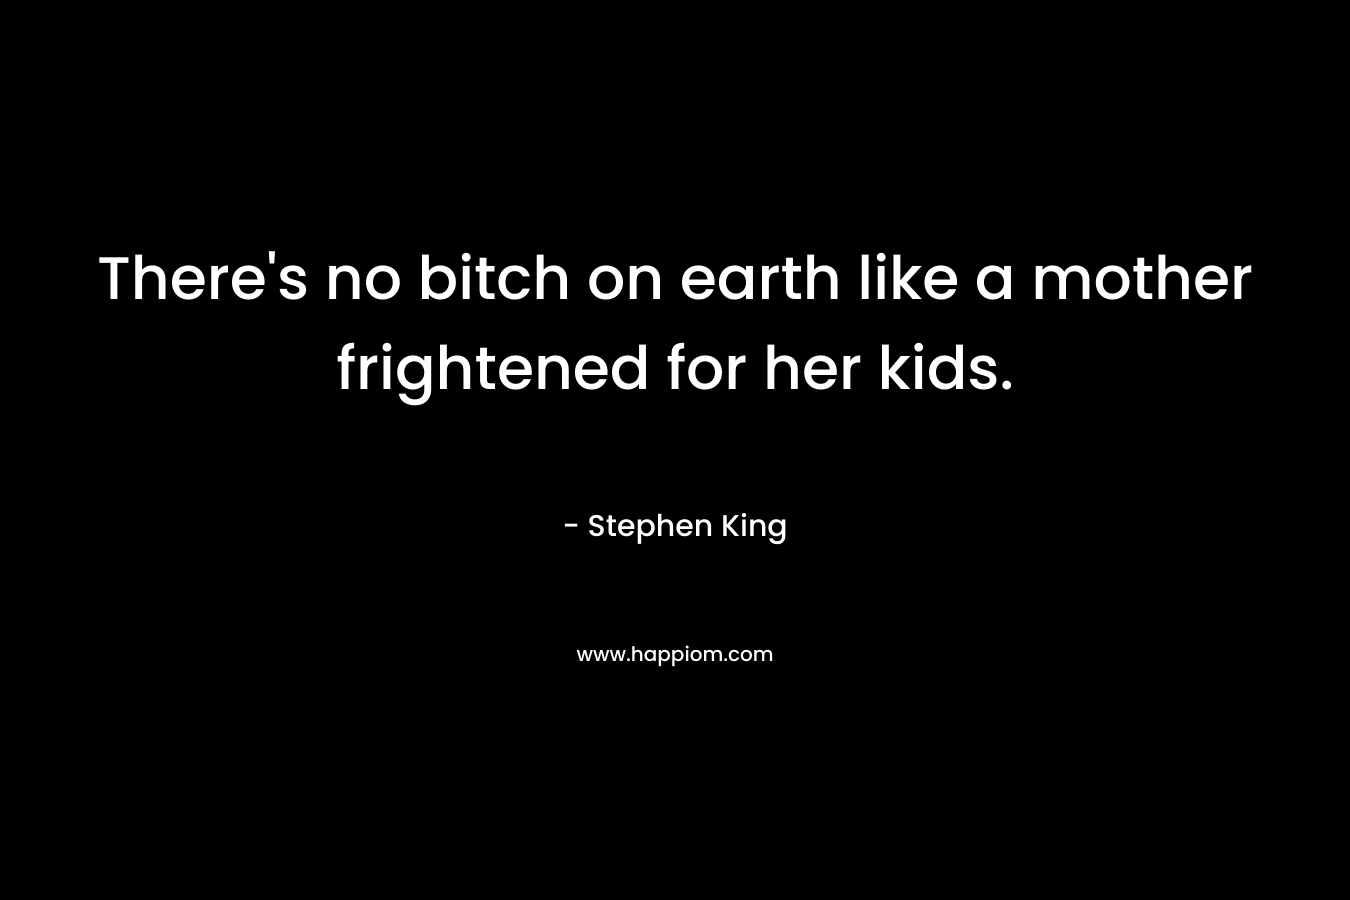 There’s no bitch on earth like a mother frightened for her kids. – Stephen King